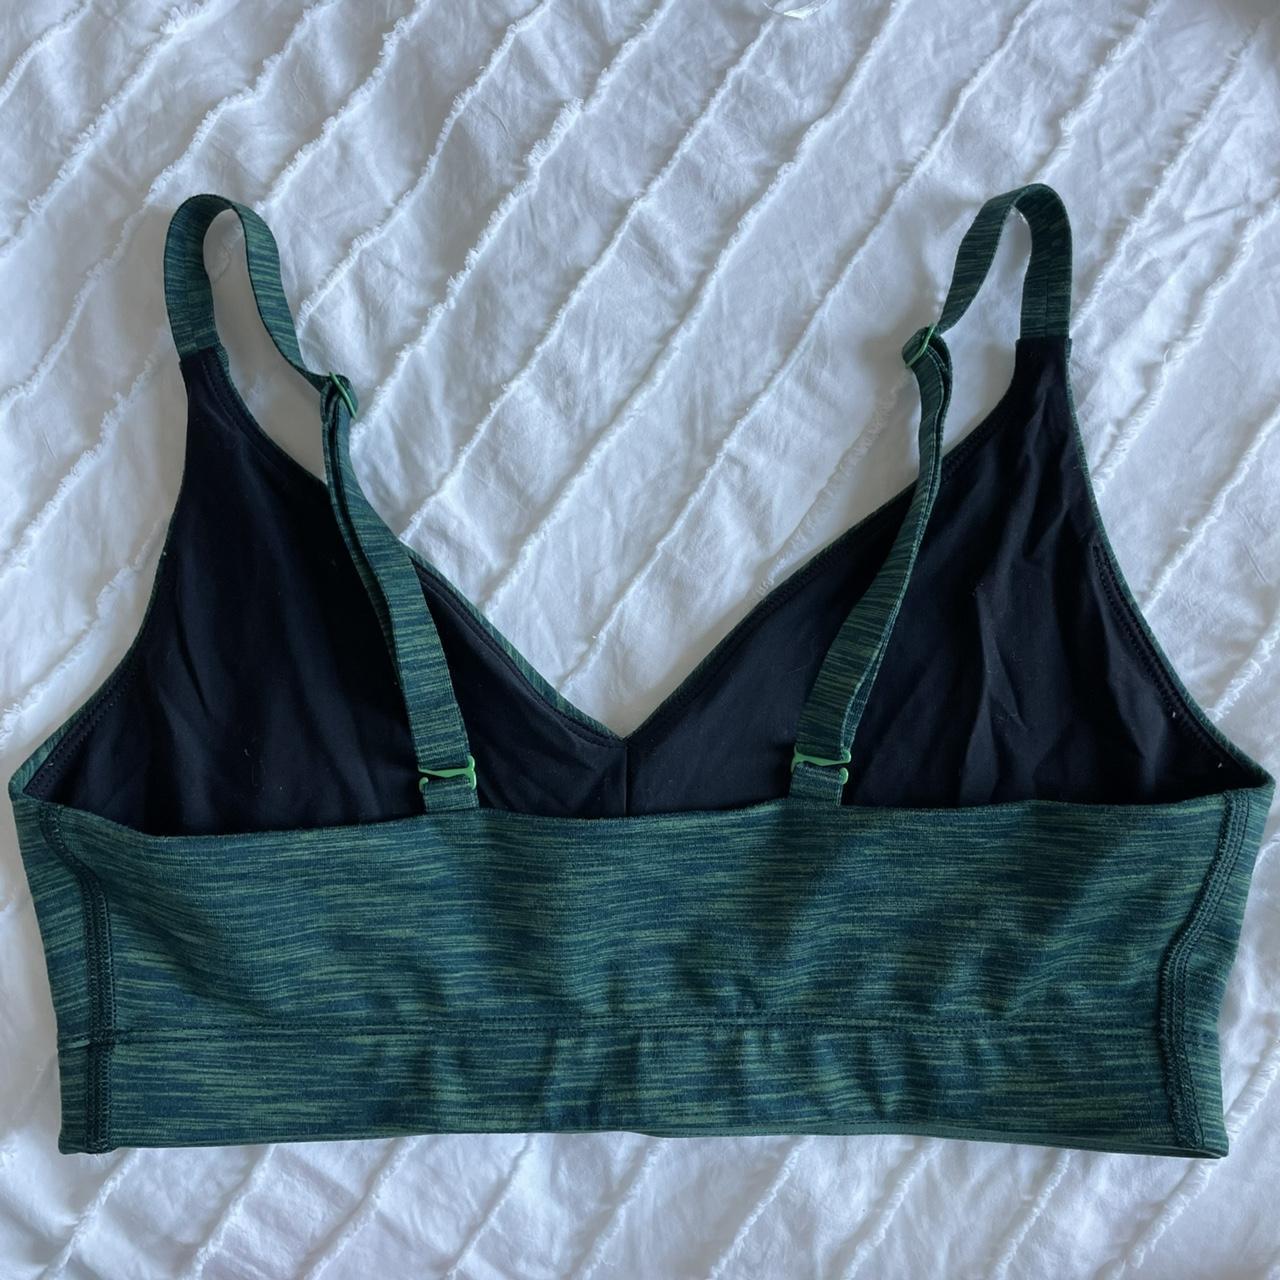 Product Image 2 - Outdoor Voices Sports Bra

Size: Small